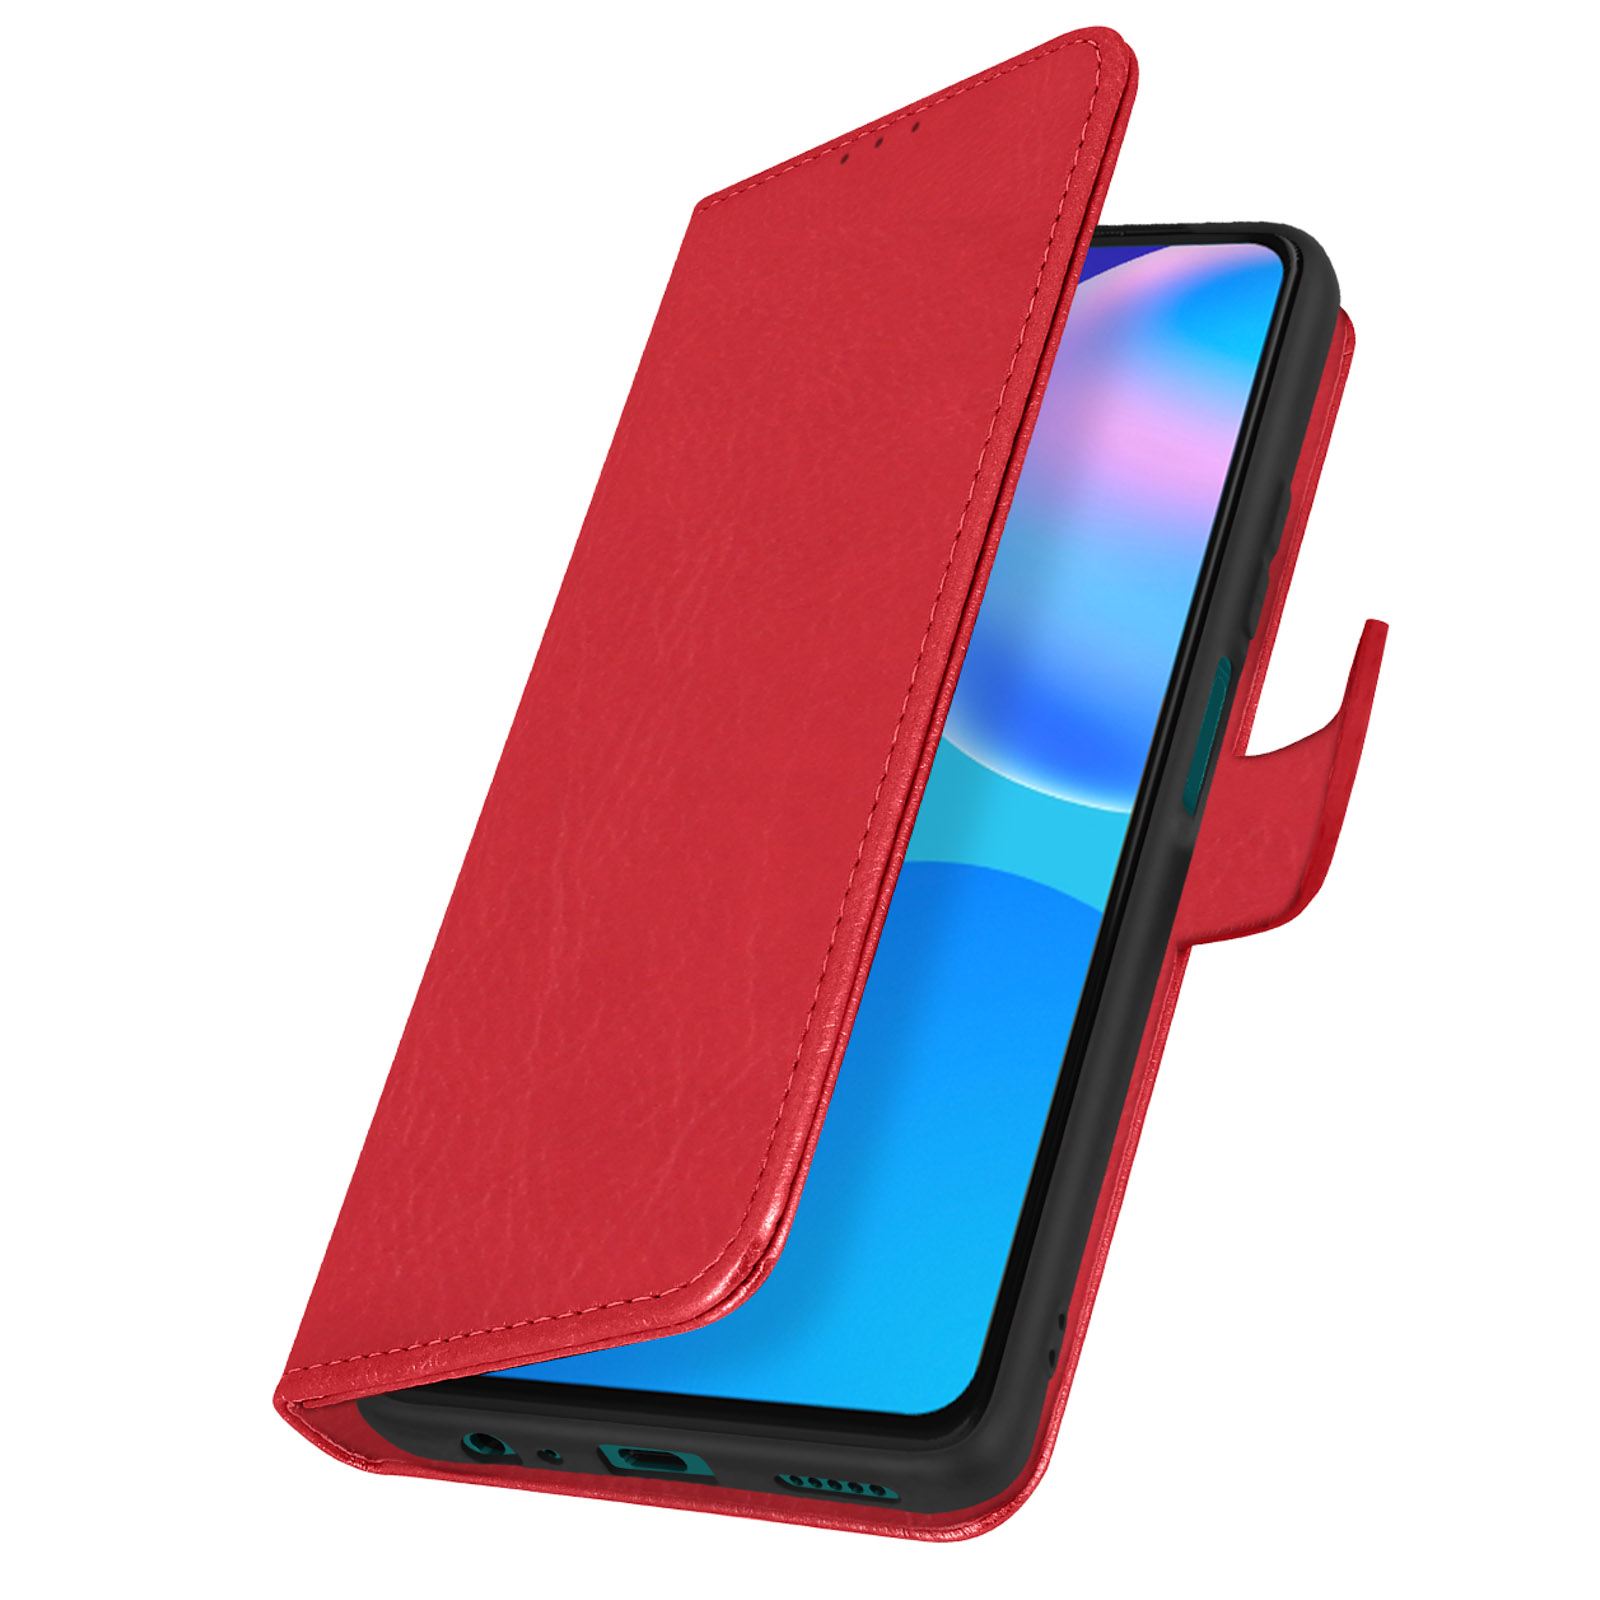 Rot Series, AVIZAR smart P Chester Bookcover, Huawei, 2021,